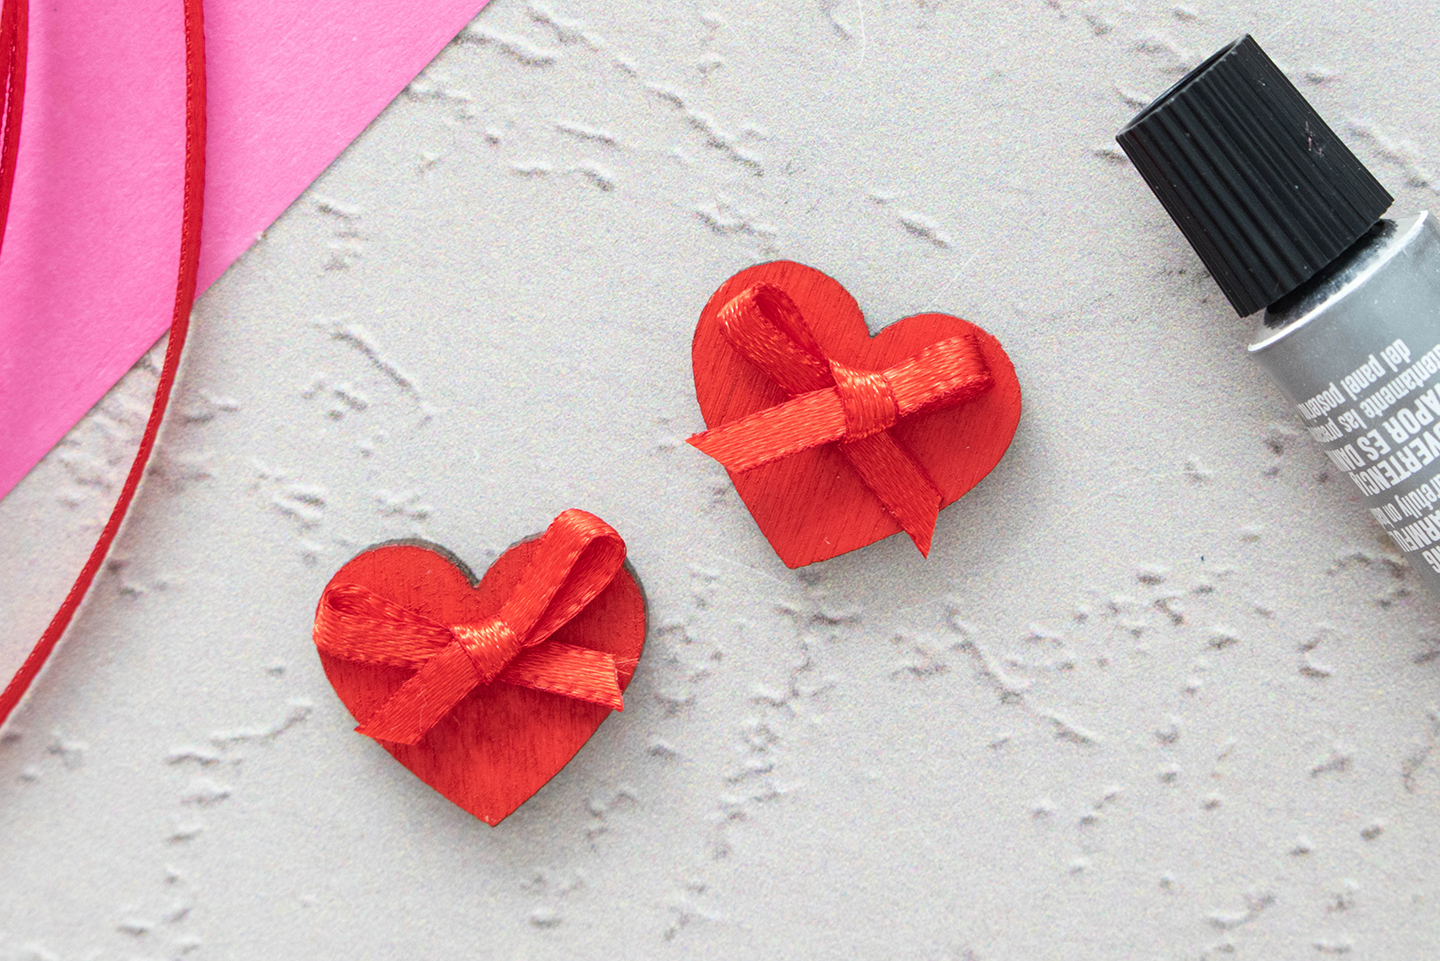 5-Minute DIY: How to Make Earrings From Paper